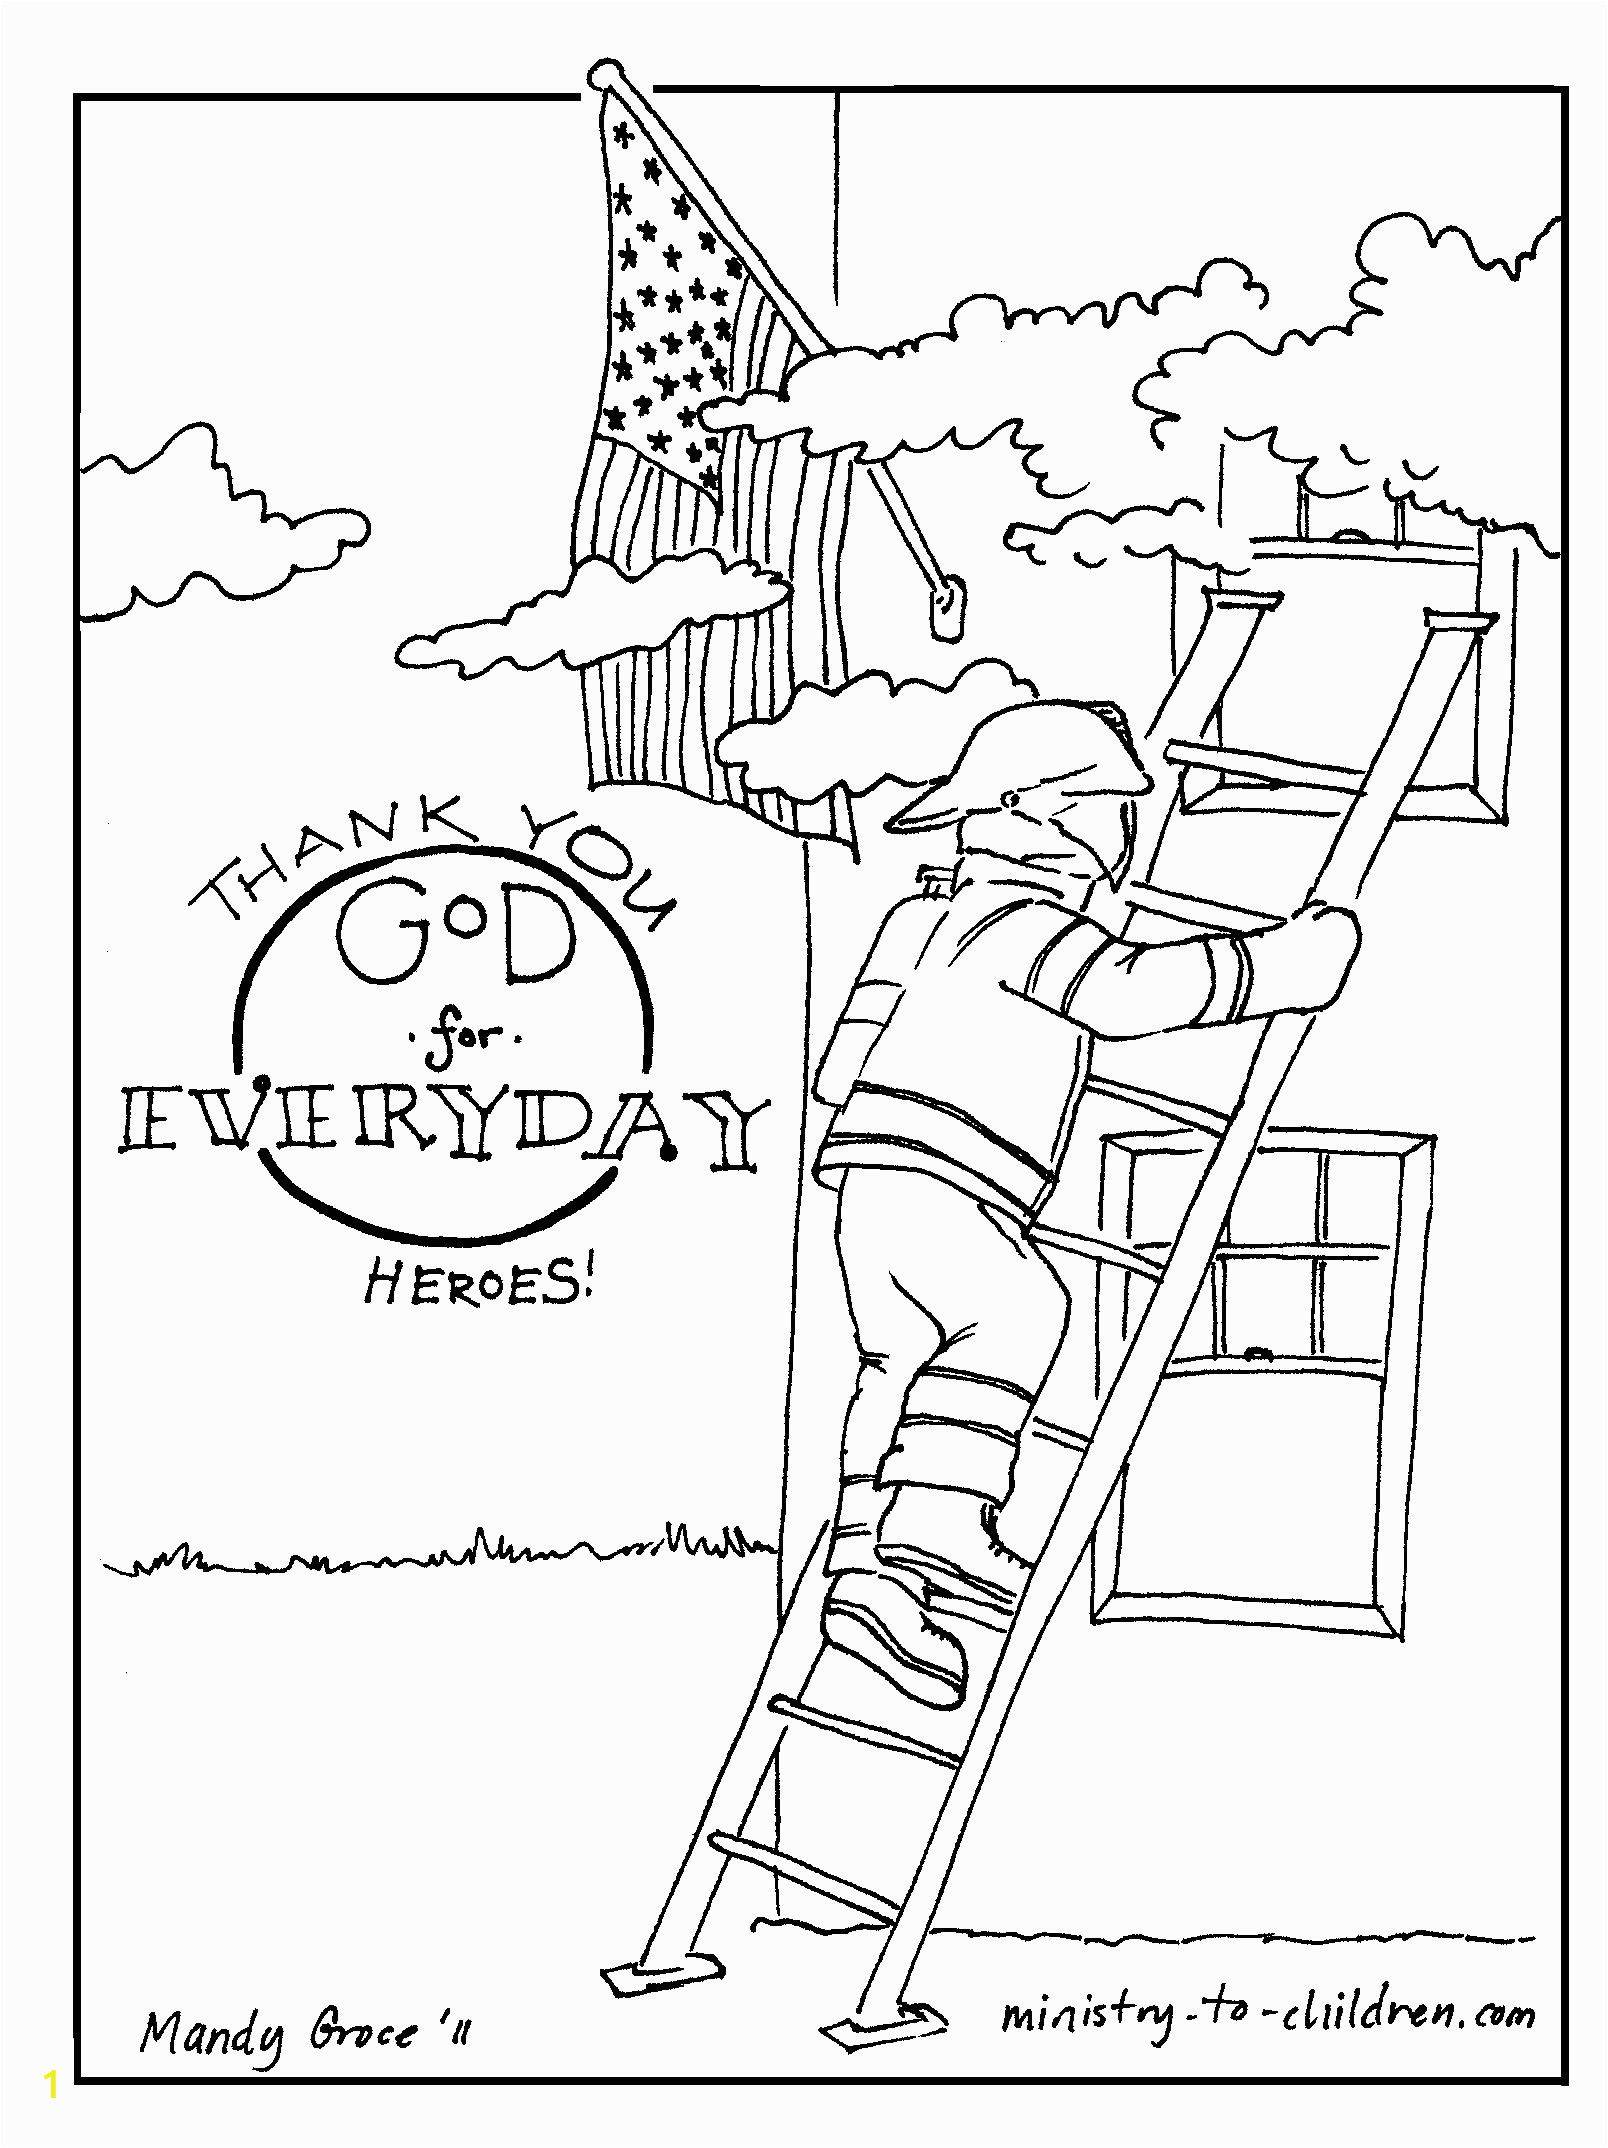 Thank You Firefighters Coloring Page Coloring Page for Kids Thank You Firefighters Coloring